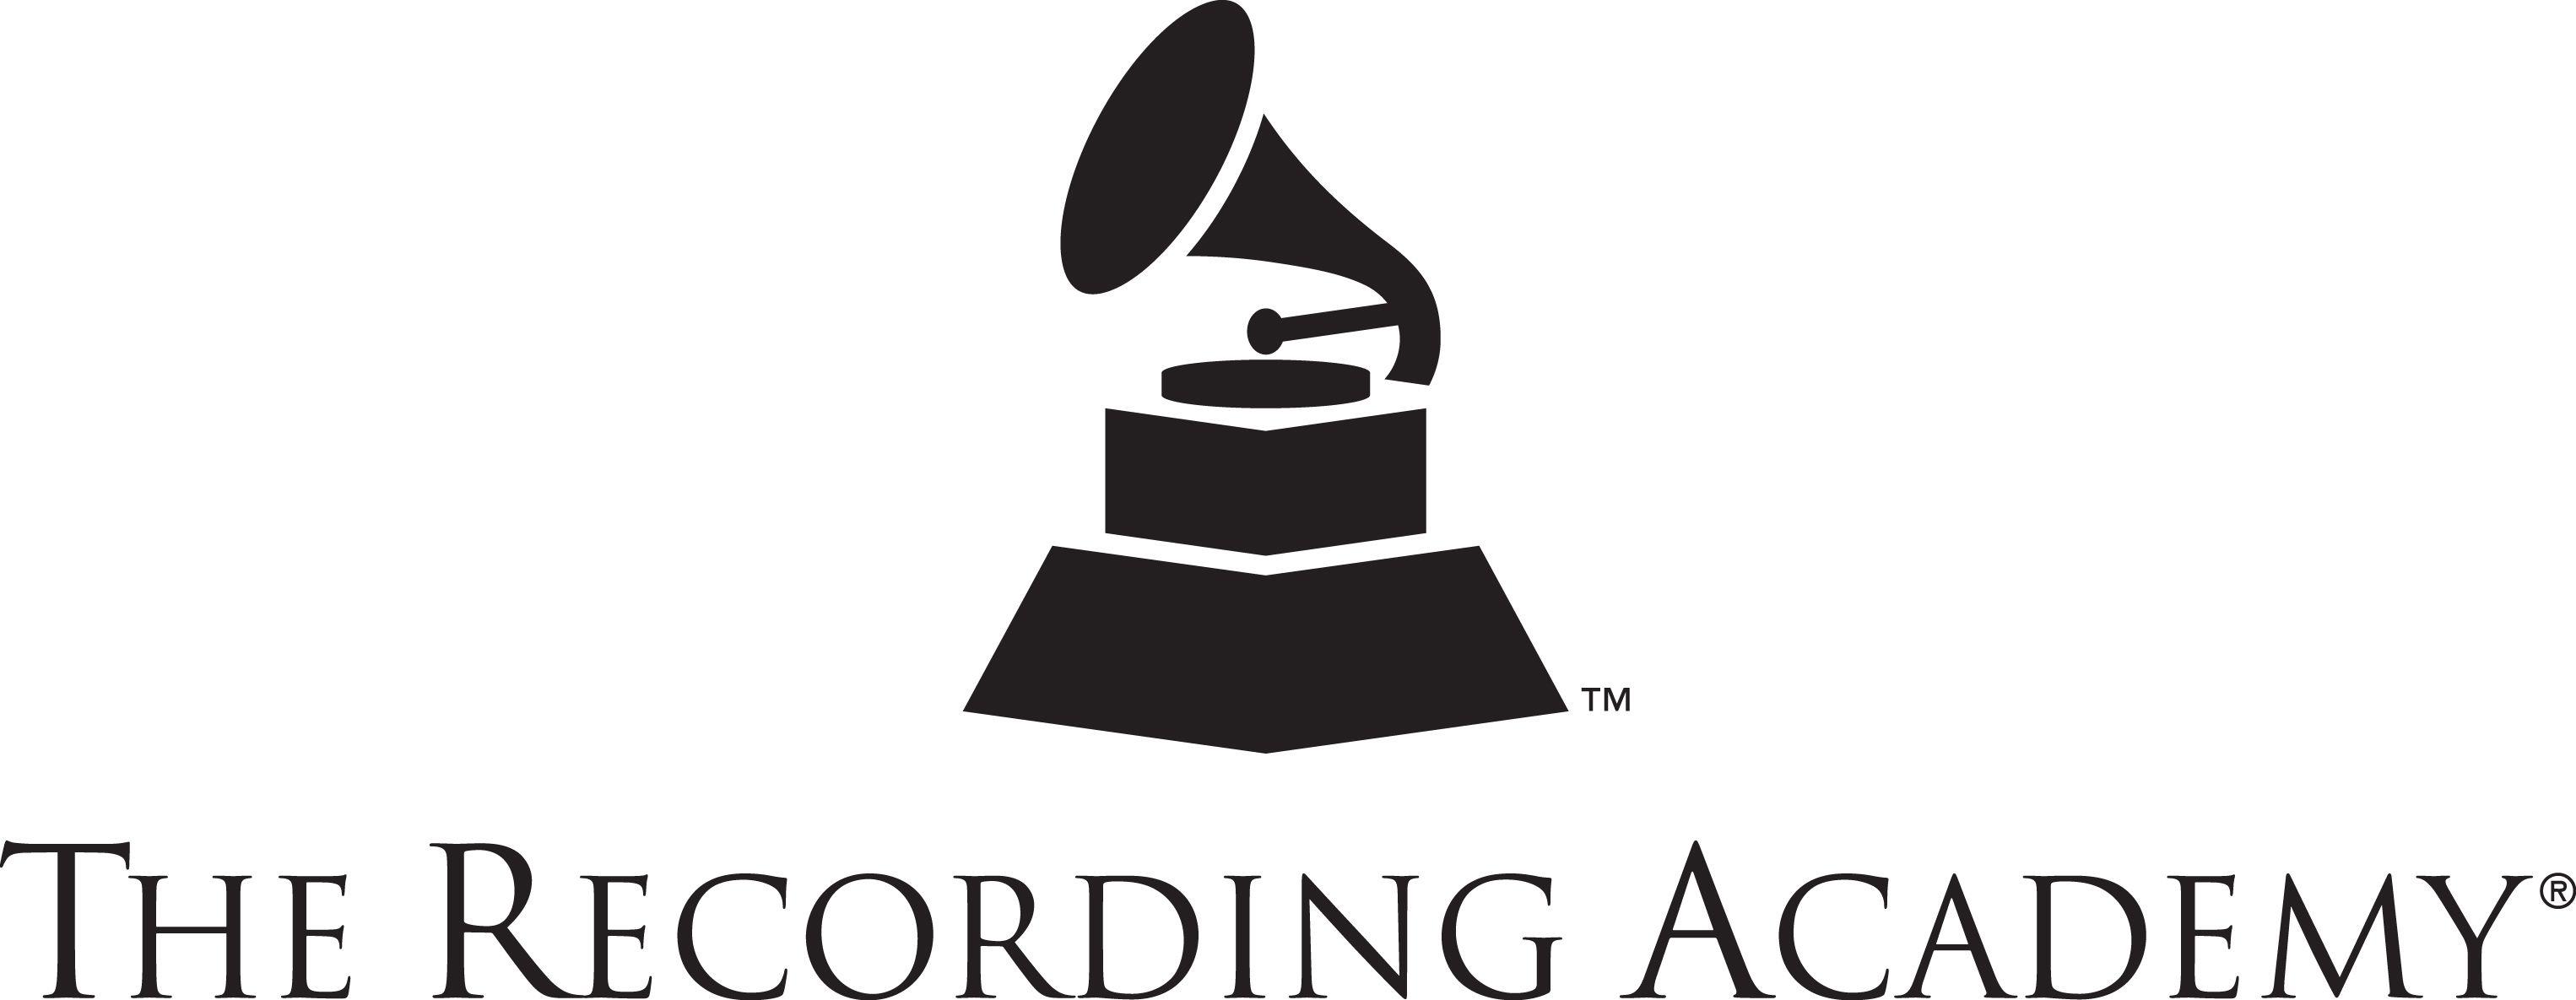 Grammy Logo - GRAMMY Happy Hour hosted by The Recording Academy. SXSW 2015 Event